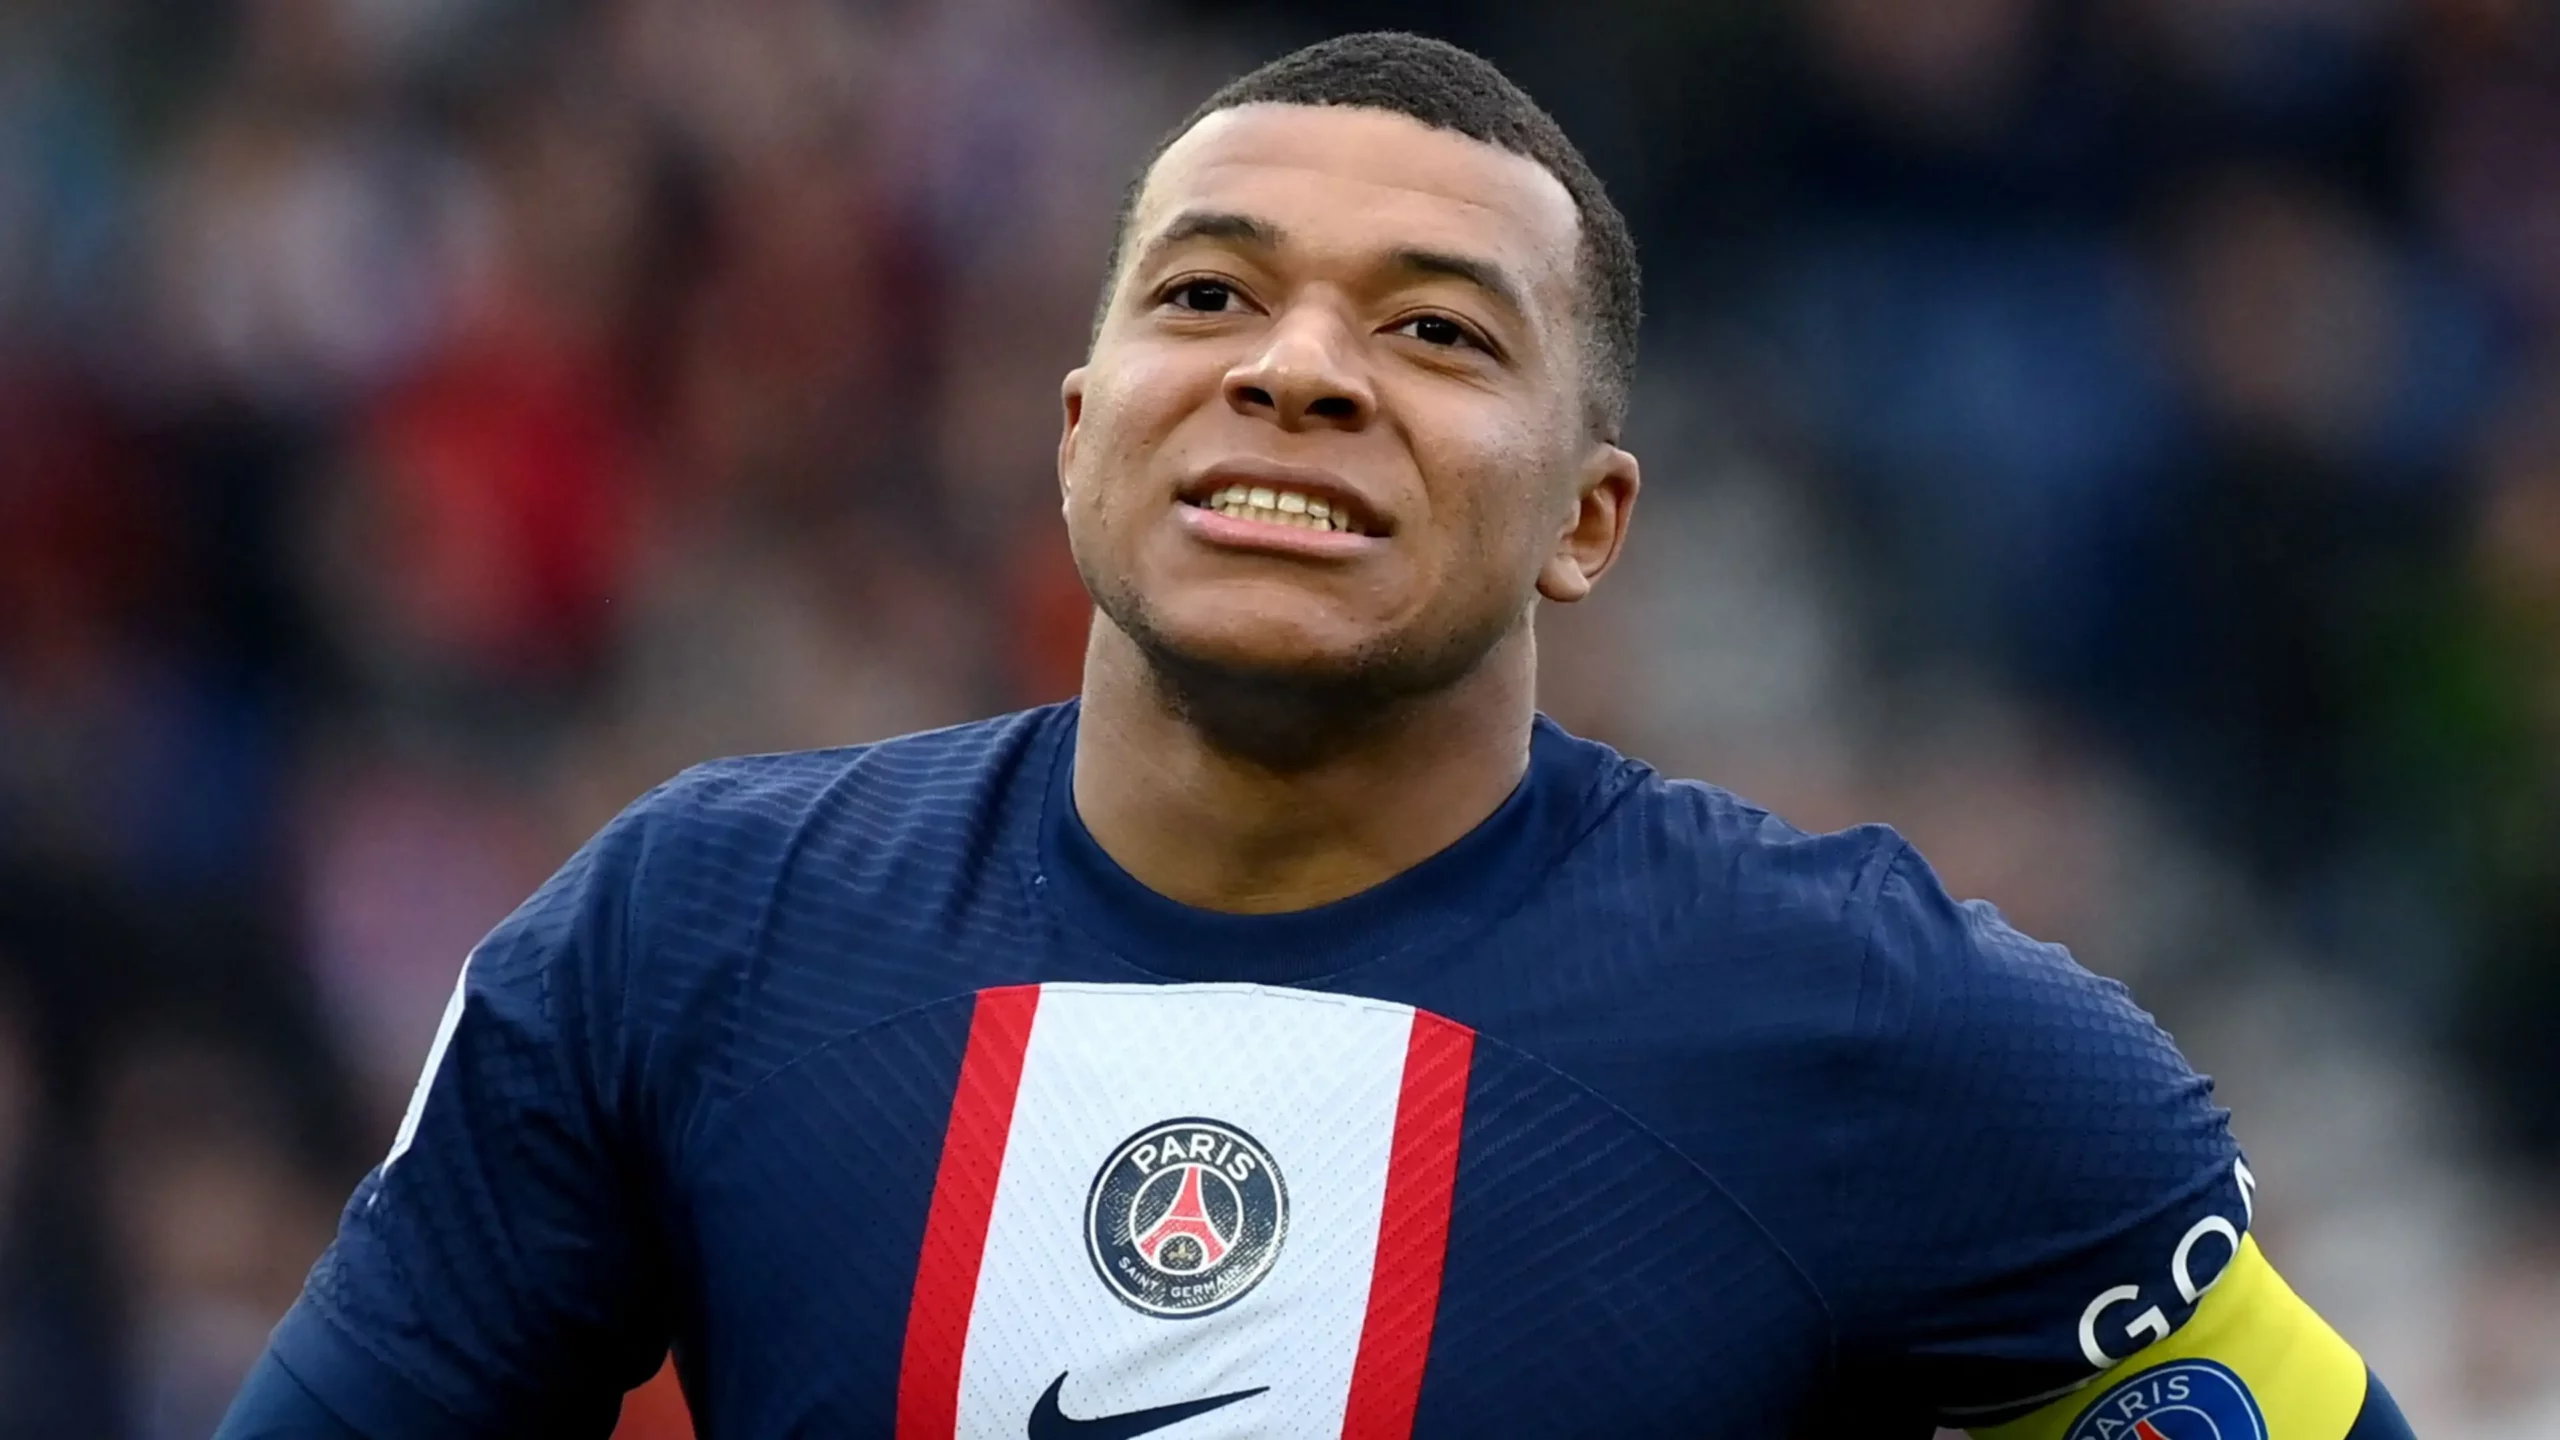 Does Kylian Mbappé finally join Real Madrid?